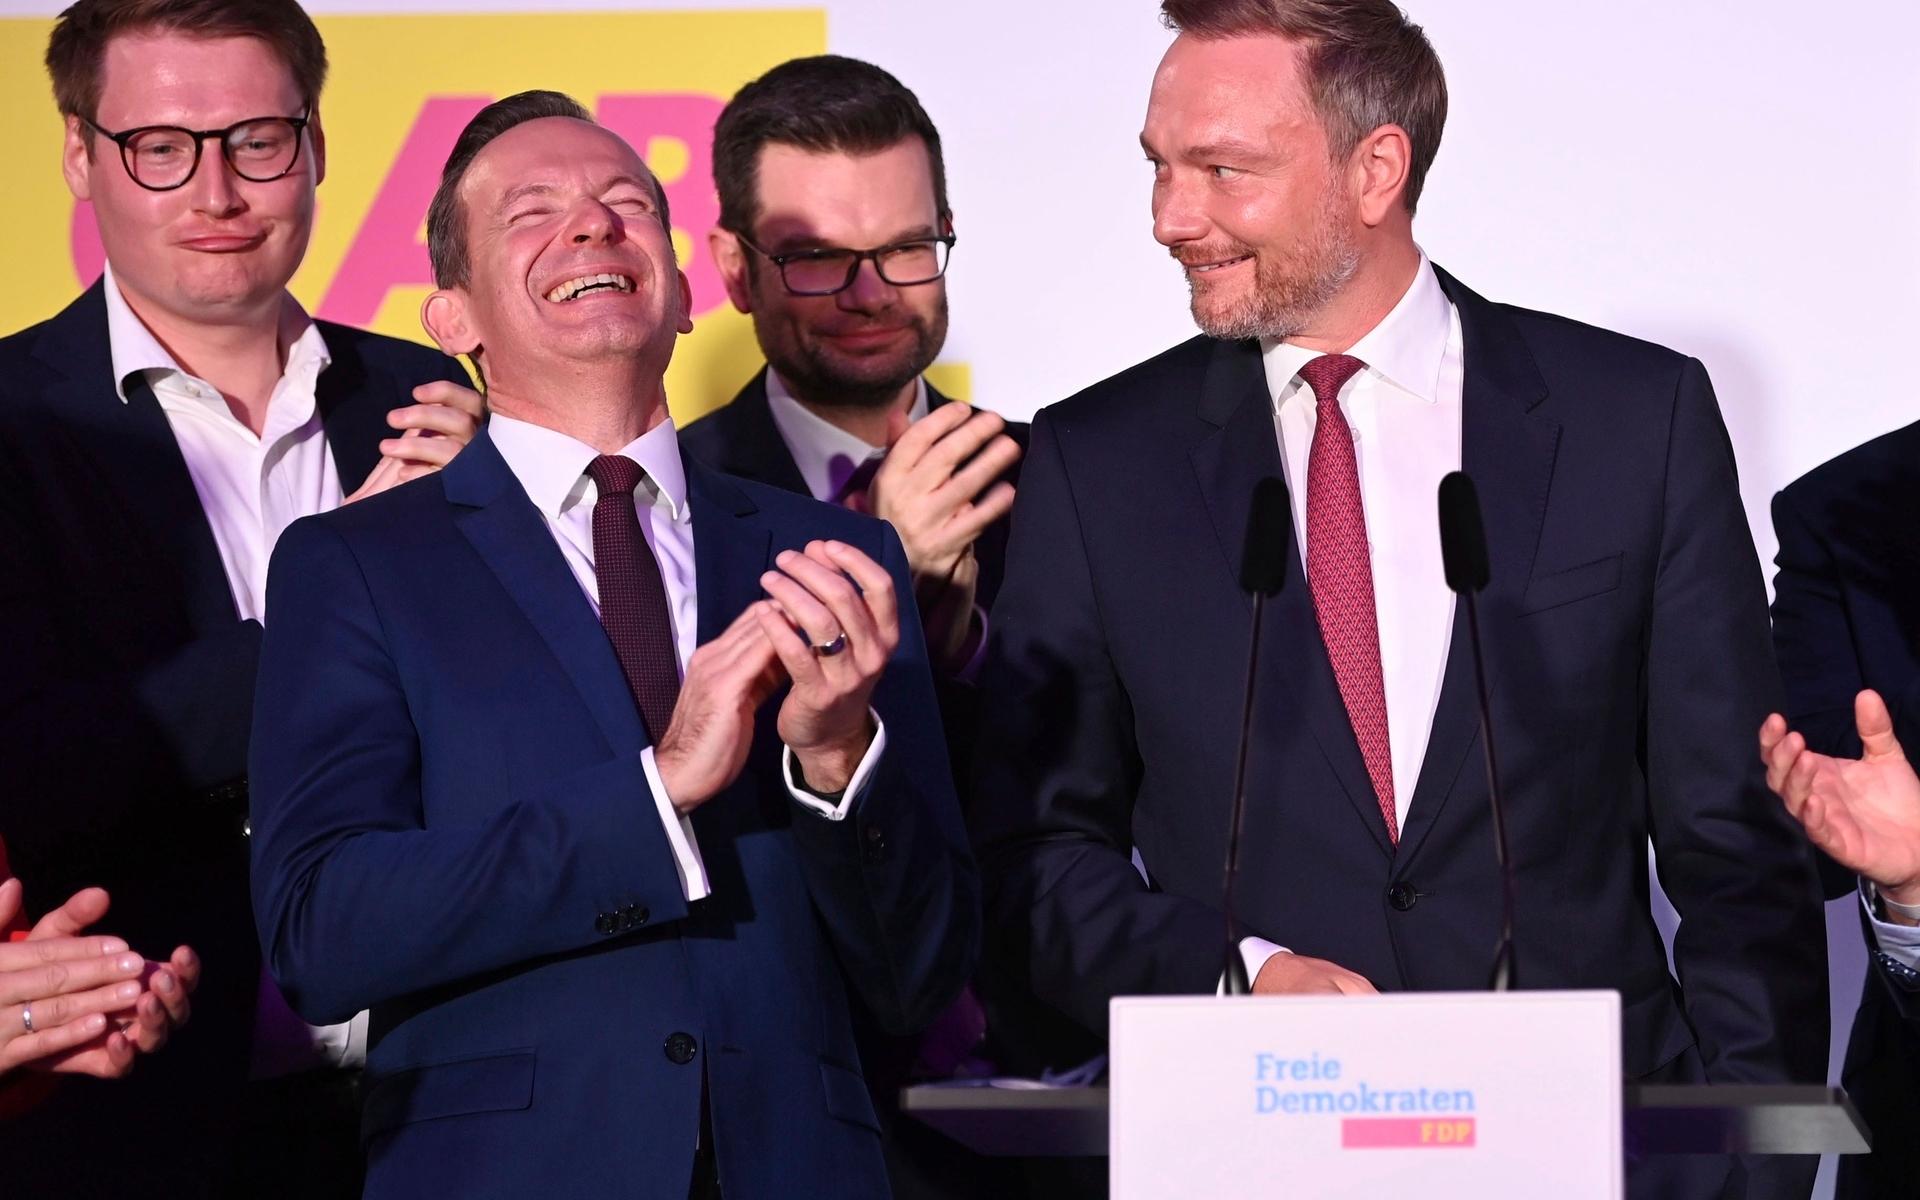 Christian Lindner, right, FDP party leader, and the Liberal party leadership stand on stage at the FDP election party fter the first forecasts were announced, in Berlin, Sunday, Sept. 26, 2021. Next to Lindner, Volker Wissing, FDP Secretary-General. Exit polls show the center-left Social Democrats in a very close race with outgoing Chancellor Angela Merkel’s bloc in Germany’s parliamentary election, which will determine who succeeds the long-time leader after 16 years in power. (Sebastian Kahnert/dpa via AP)  LFP337